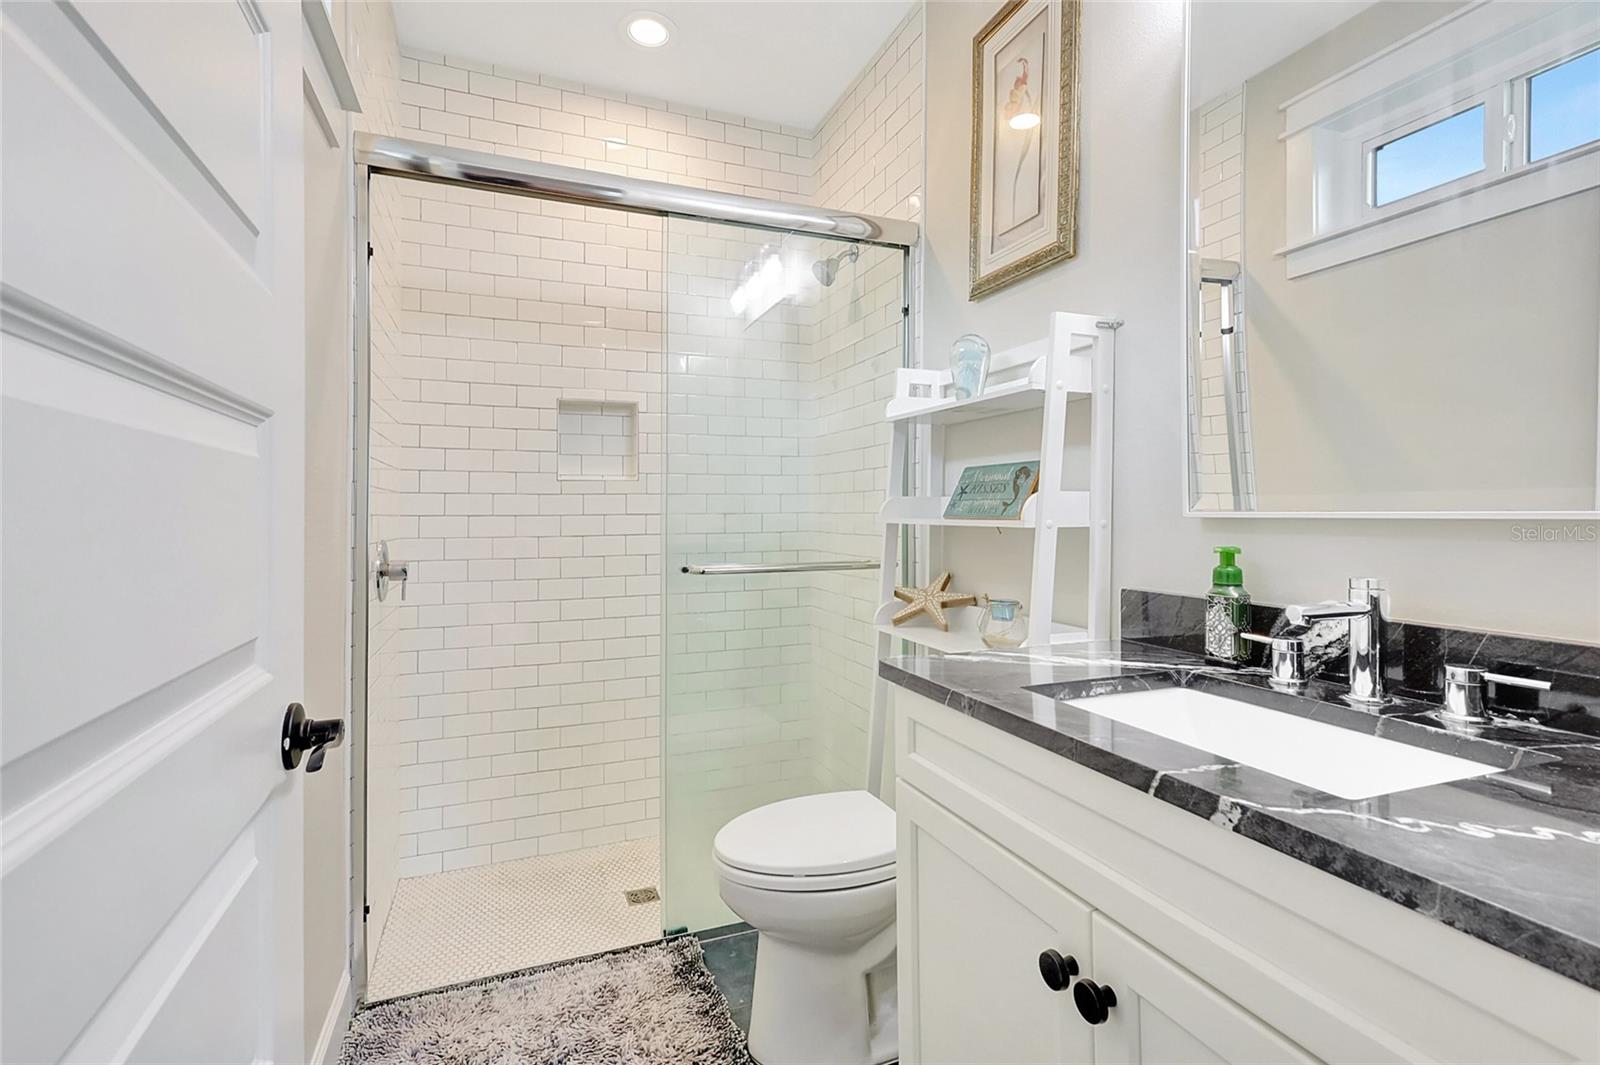 Bedroom Three's ensuite with subway tile